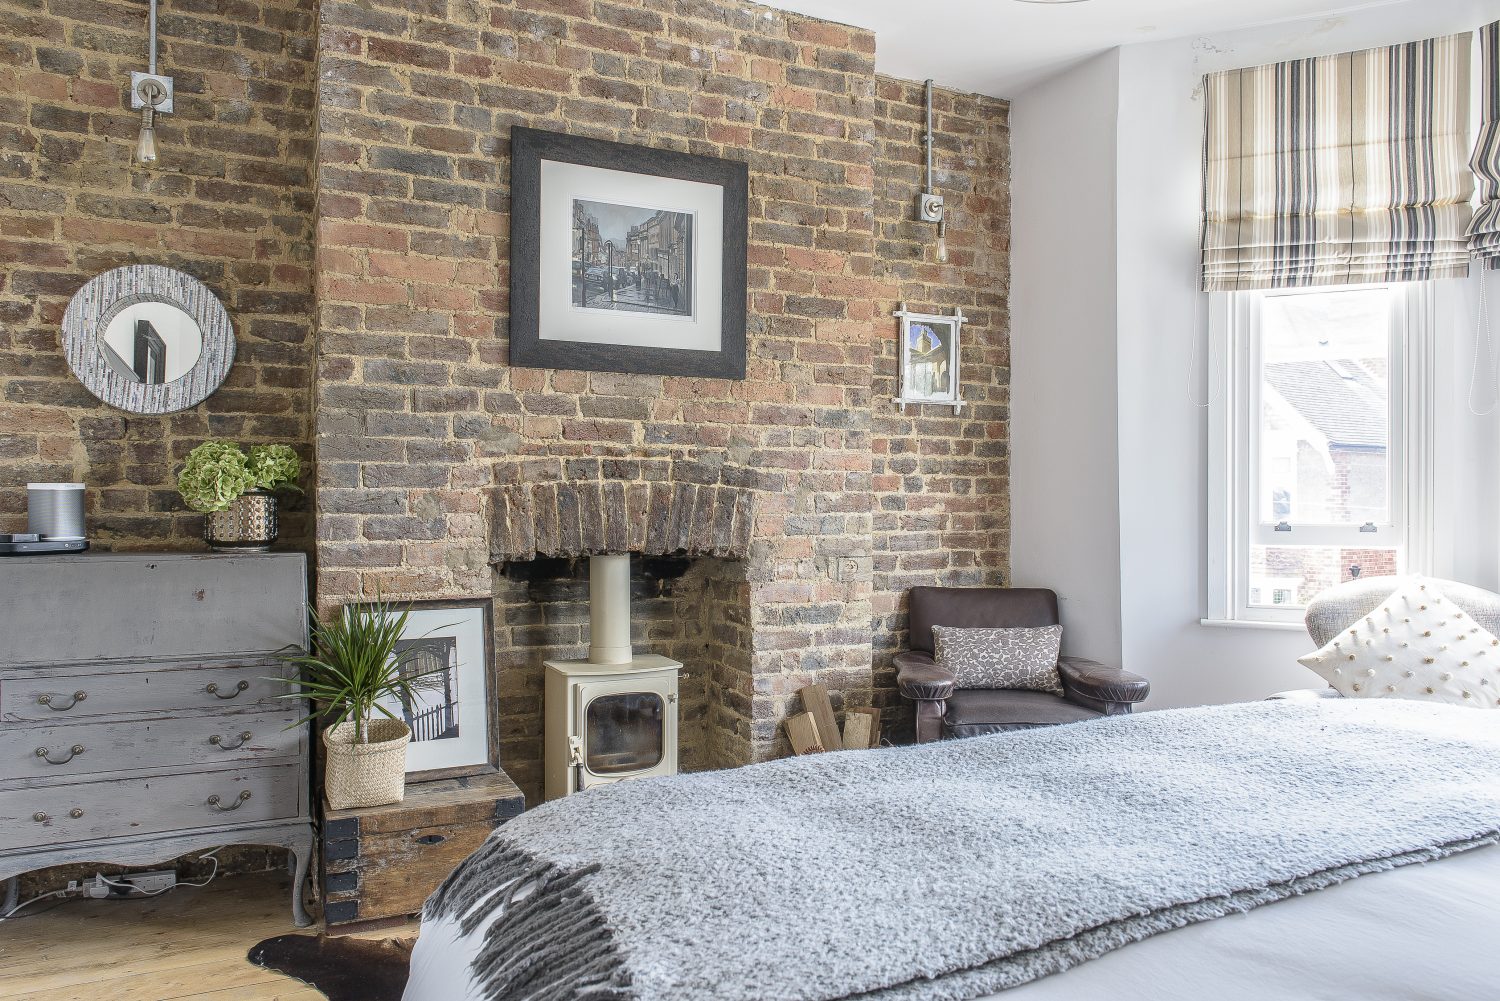 The whole first floor has been created as a master suite, with the bedroom styled as a cosy second sitting room, with a woodburner, against another wall of exposed brick